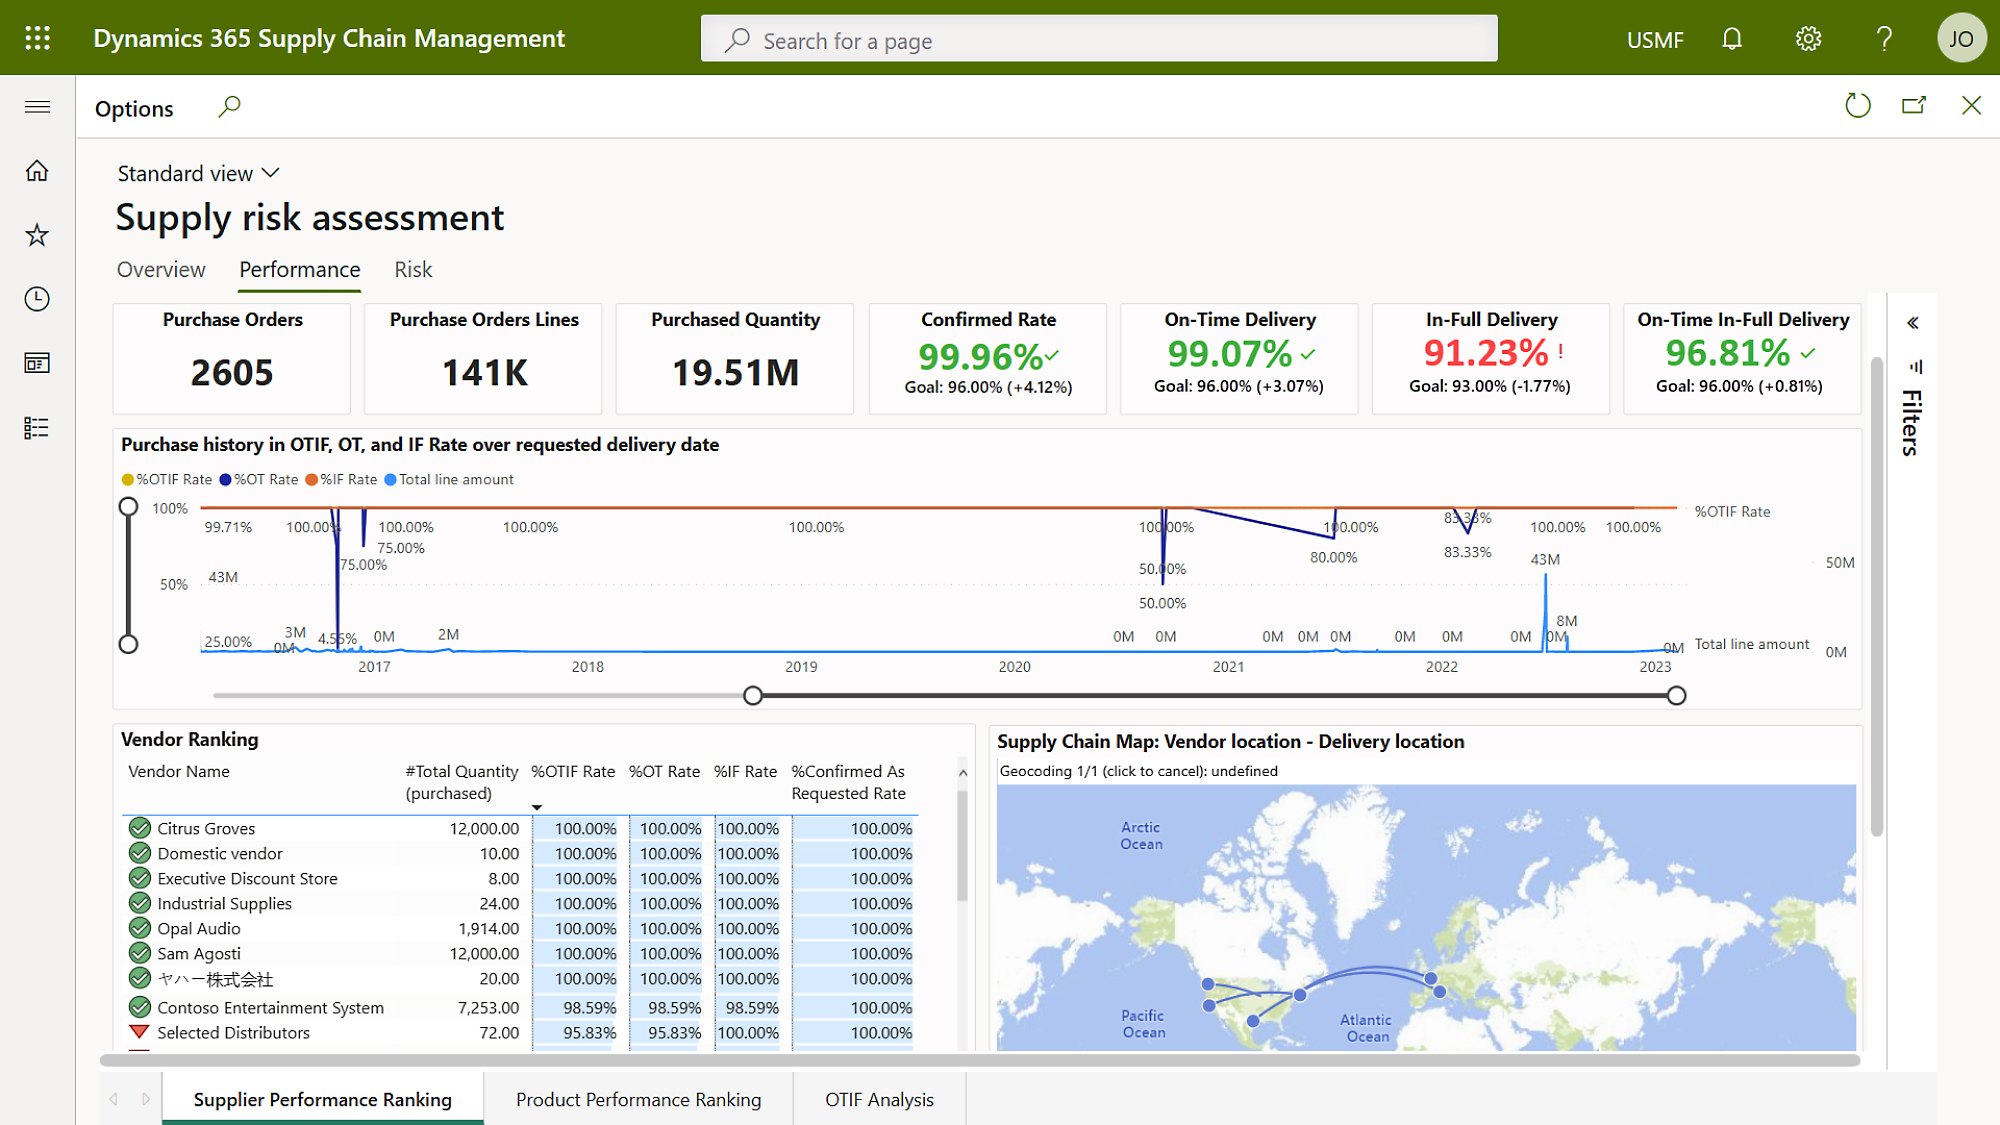 Dashboard showing world map and other stats for risk assessment in supply chain management.